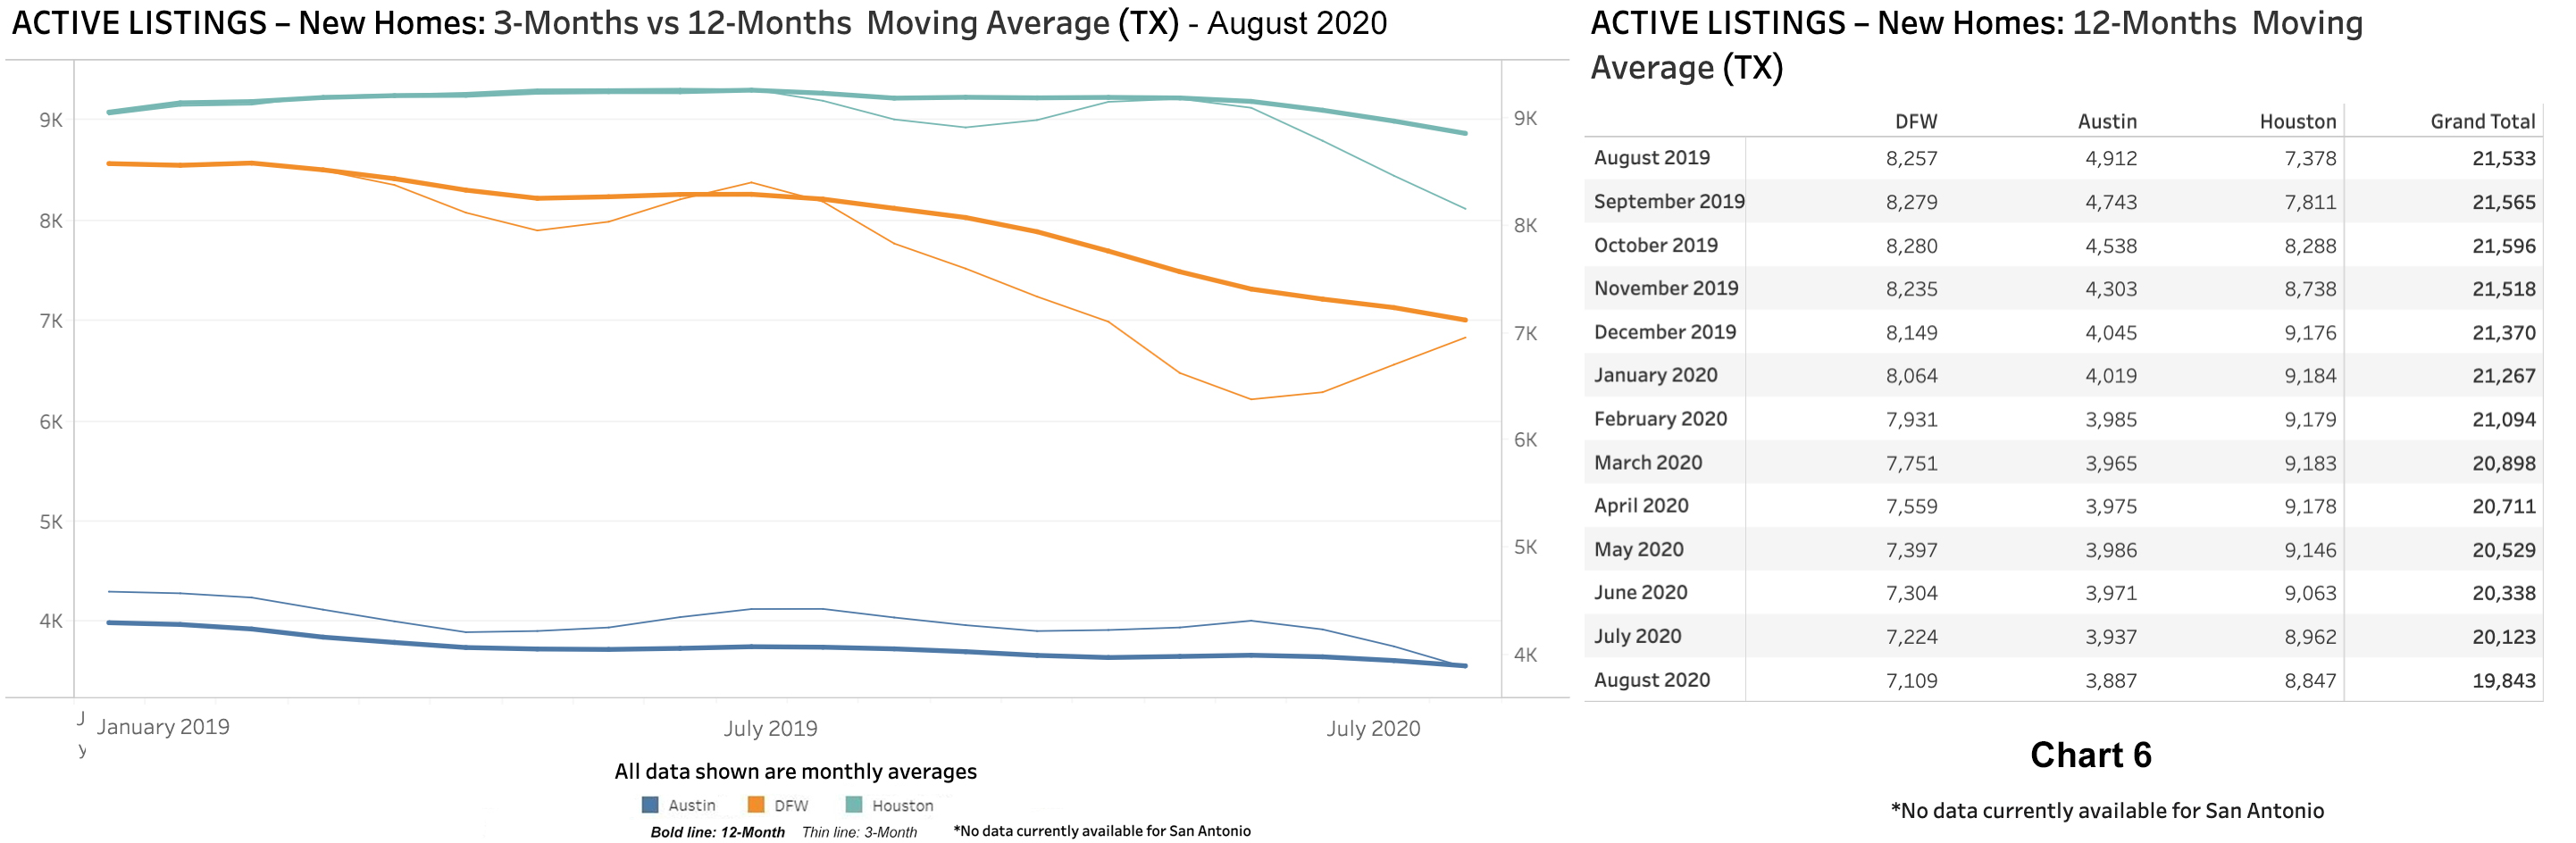 Chart 6: Active Listings for New Home Sales - August 2020